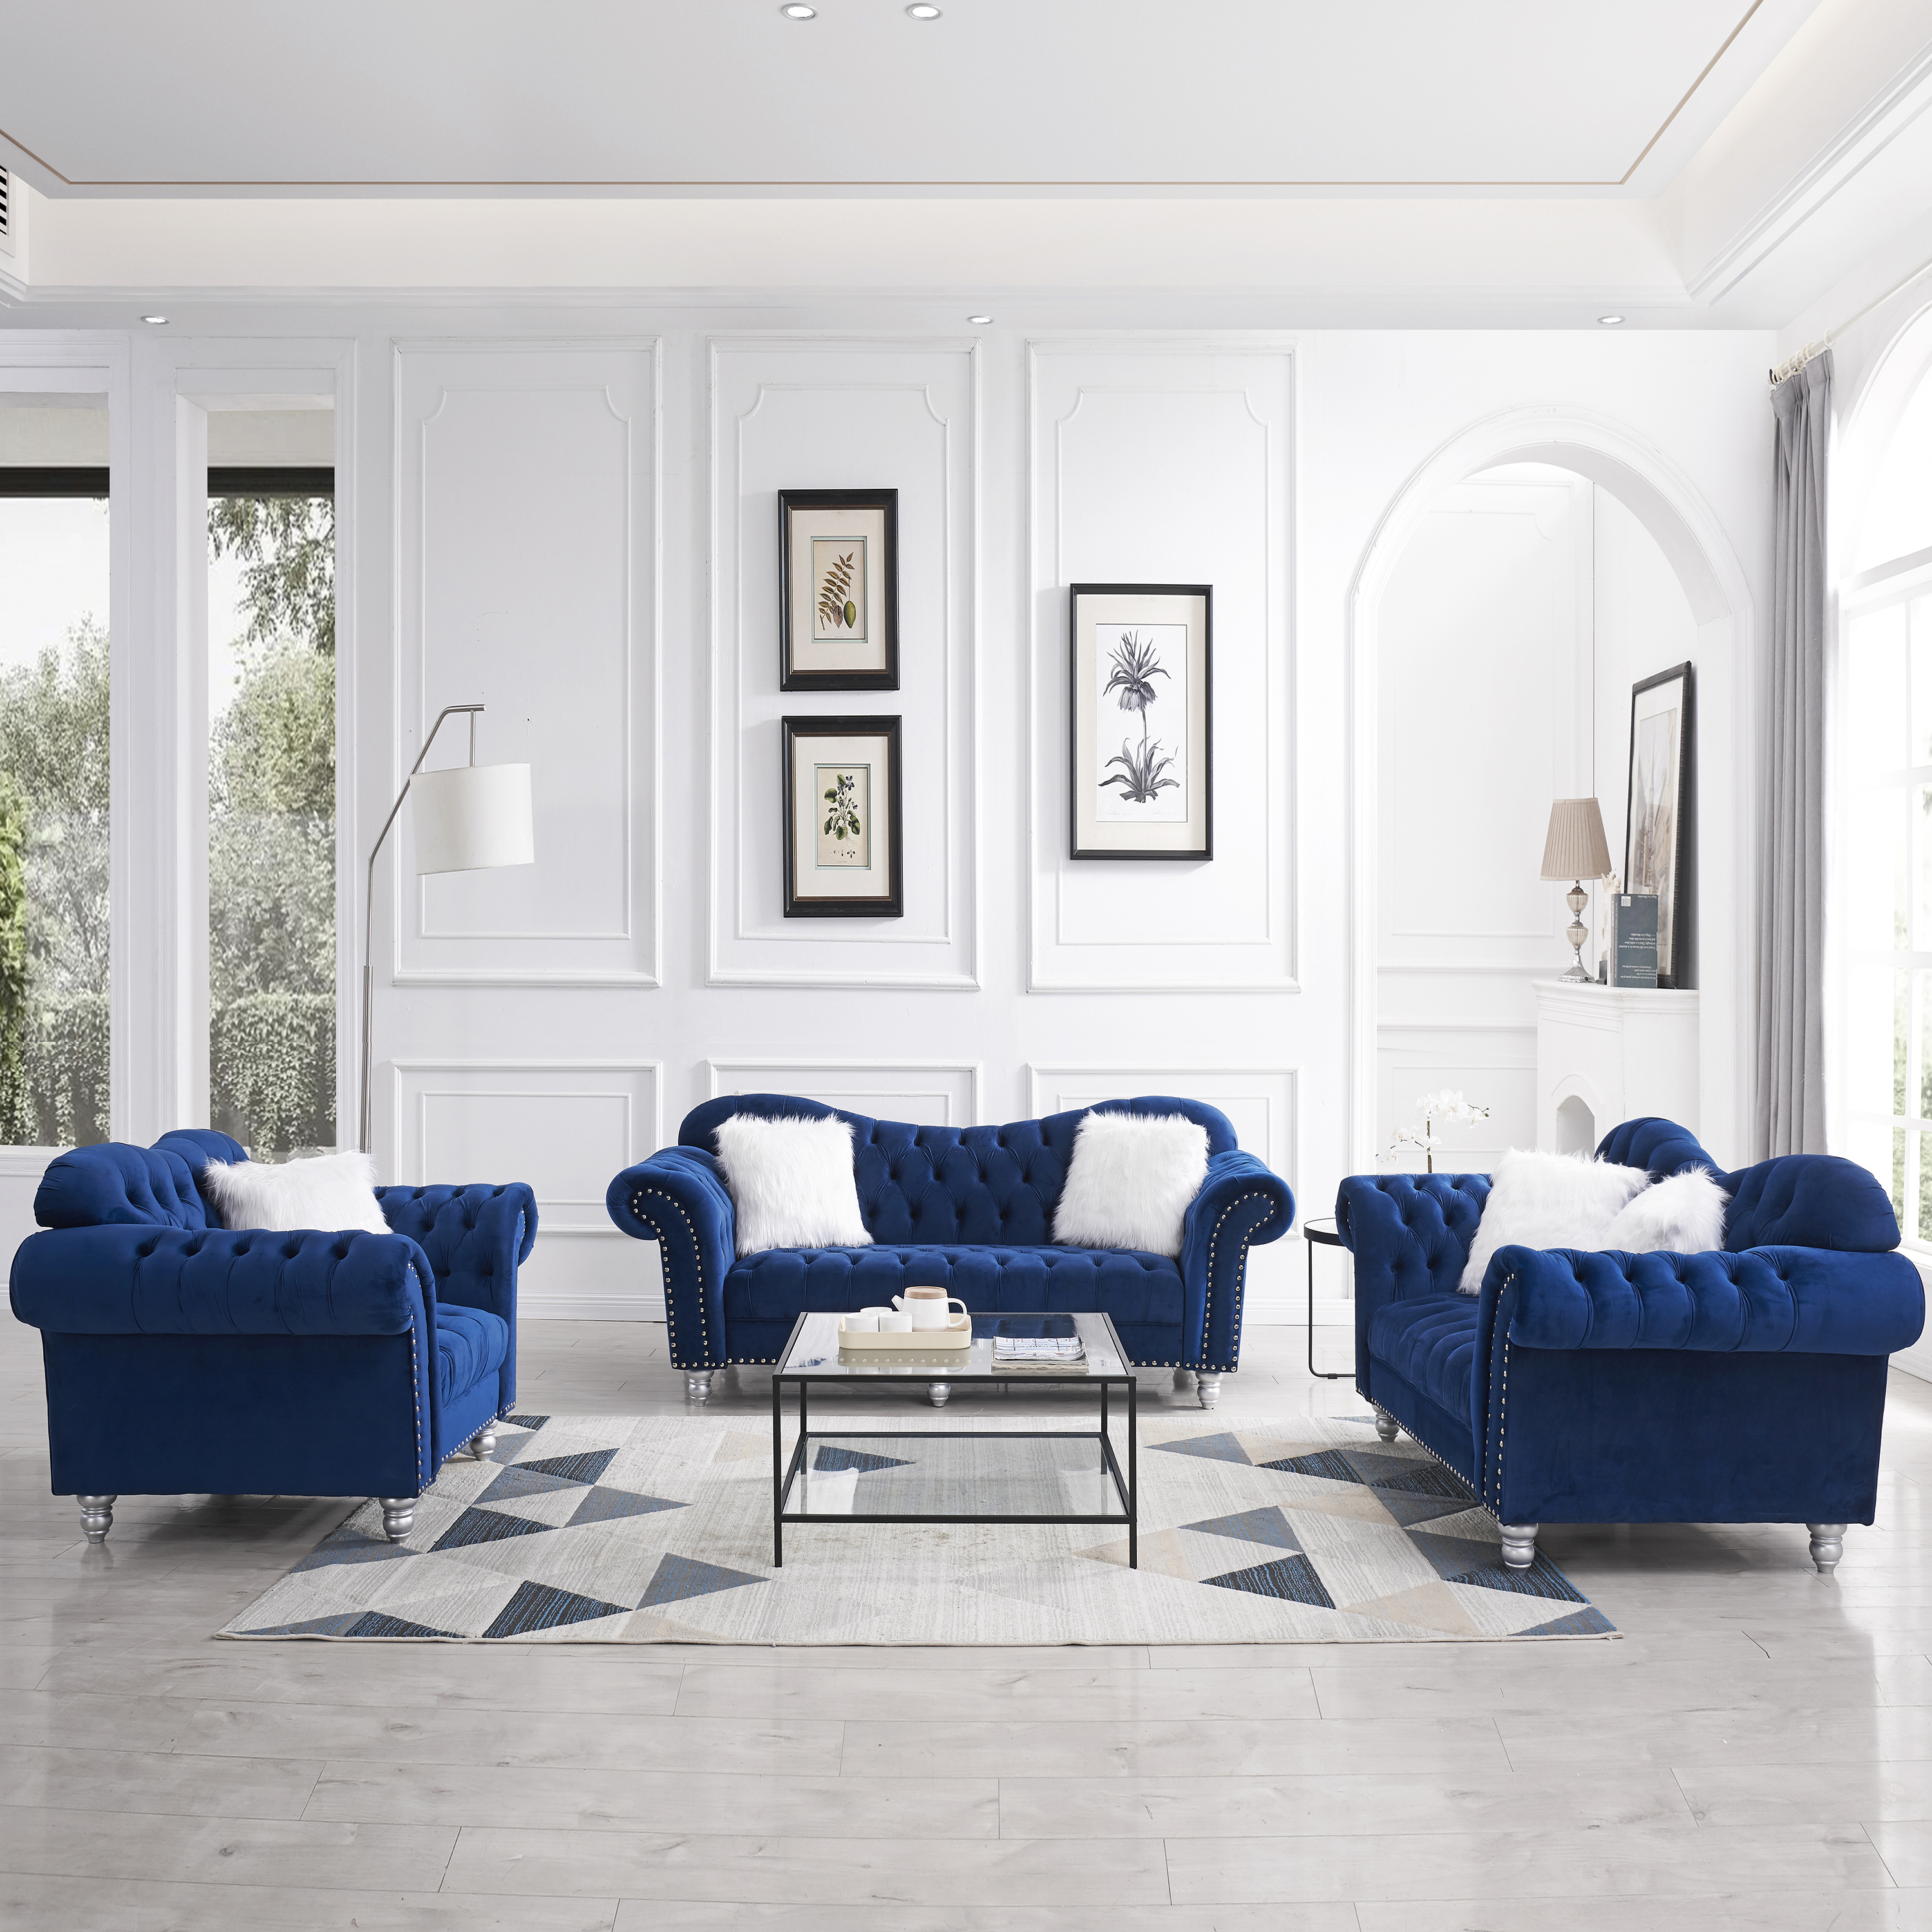 3 Piece Living Room Sofa Set, including 3-Seater Sofa, Loveseat and Sofa Chair, with Button and Copper Nail on Arms and Back, Five White Villose Pillow, Blue.-Boyel Living